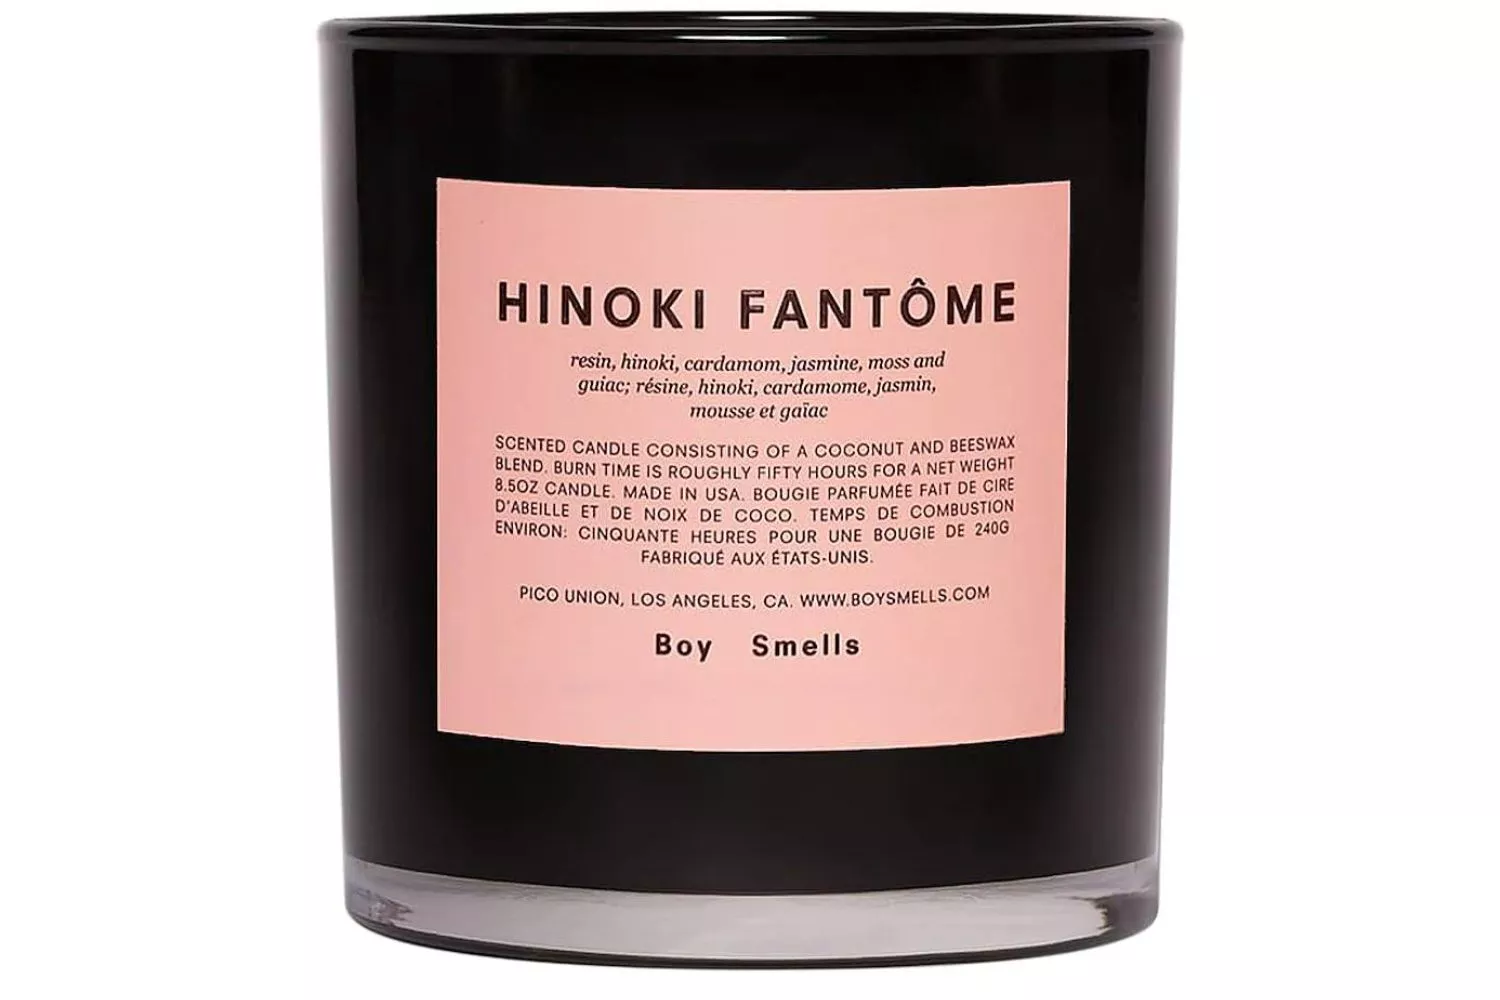 Boy Smells The Fantome Scented Candle